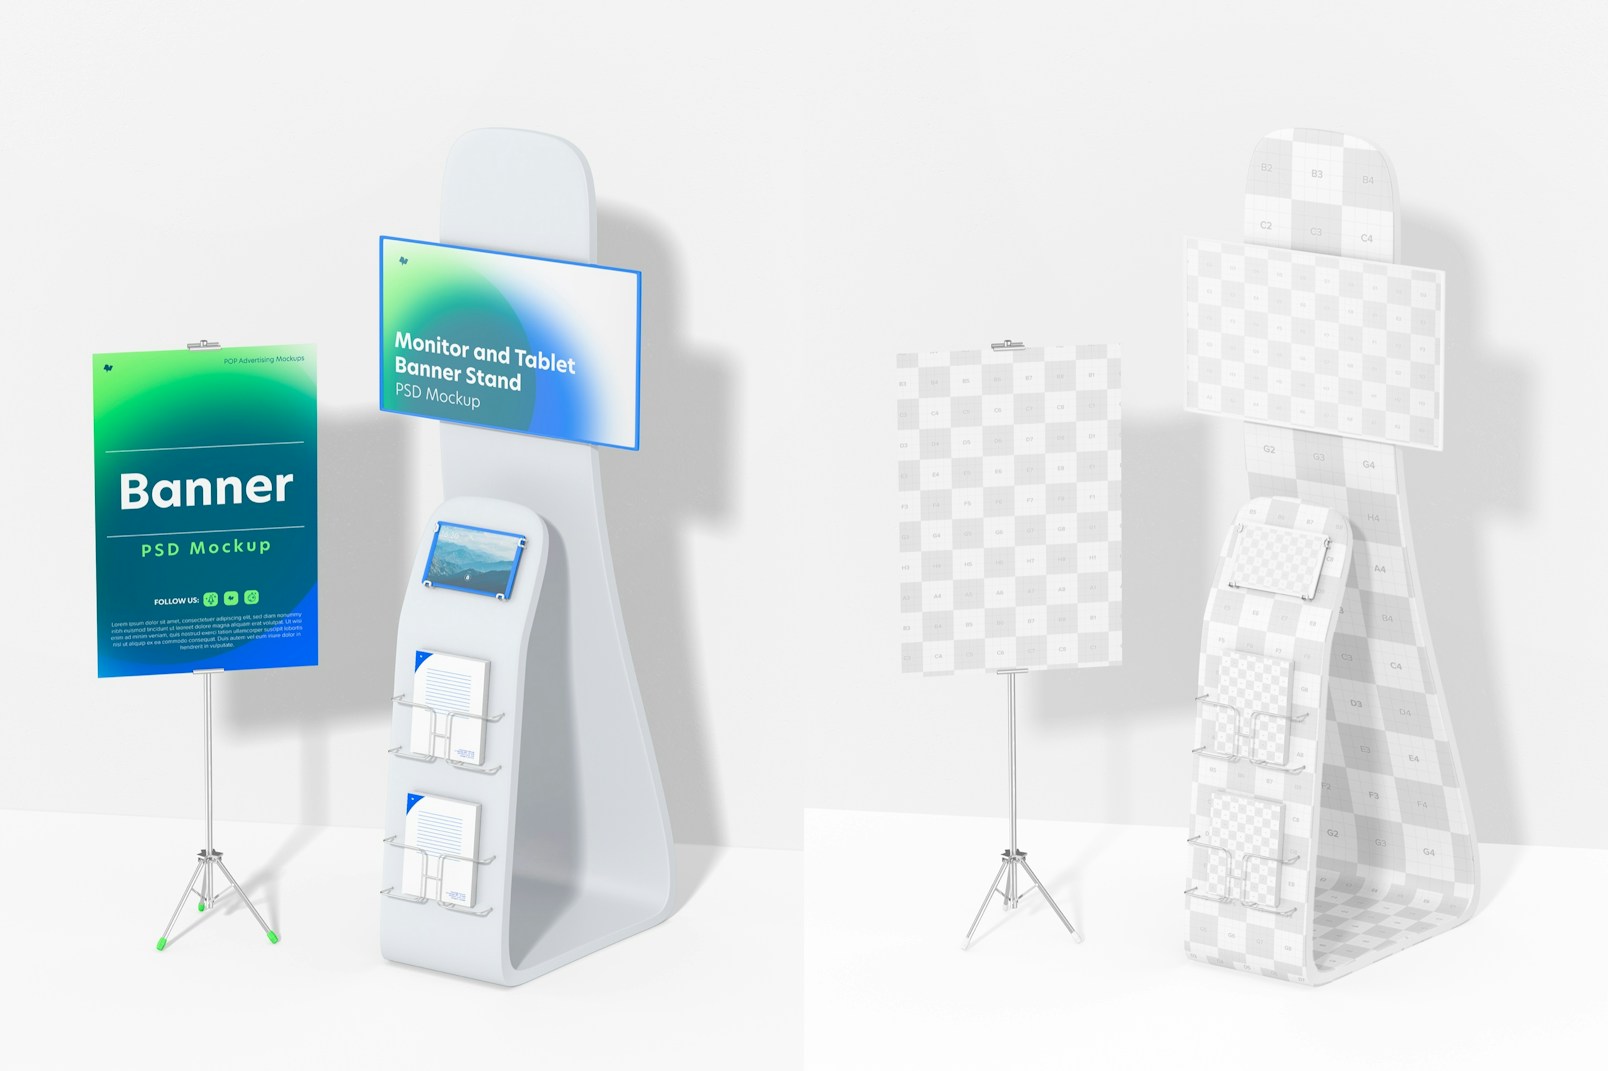 Monitor and Tablet Banner Stand Mockup